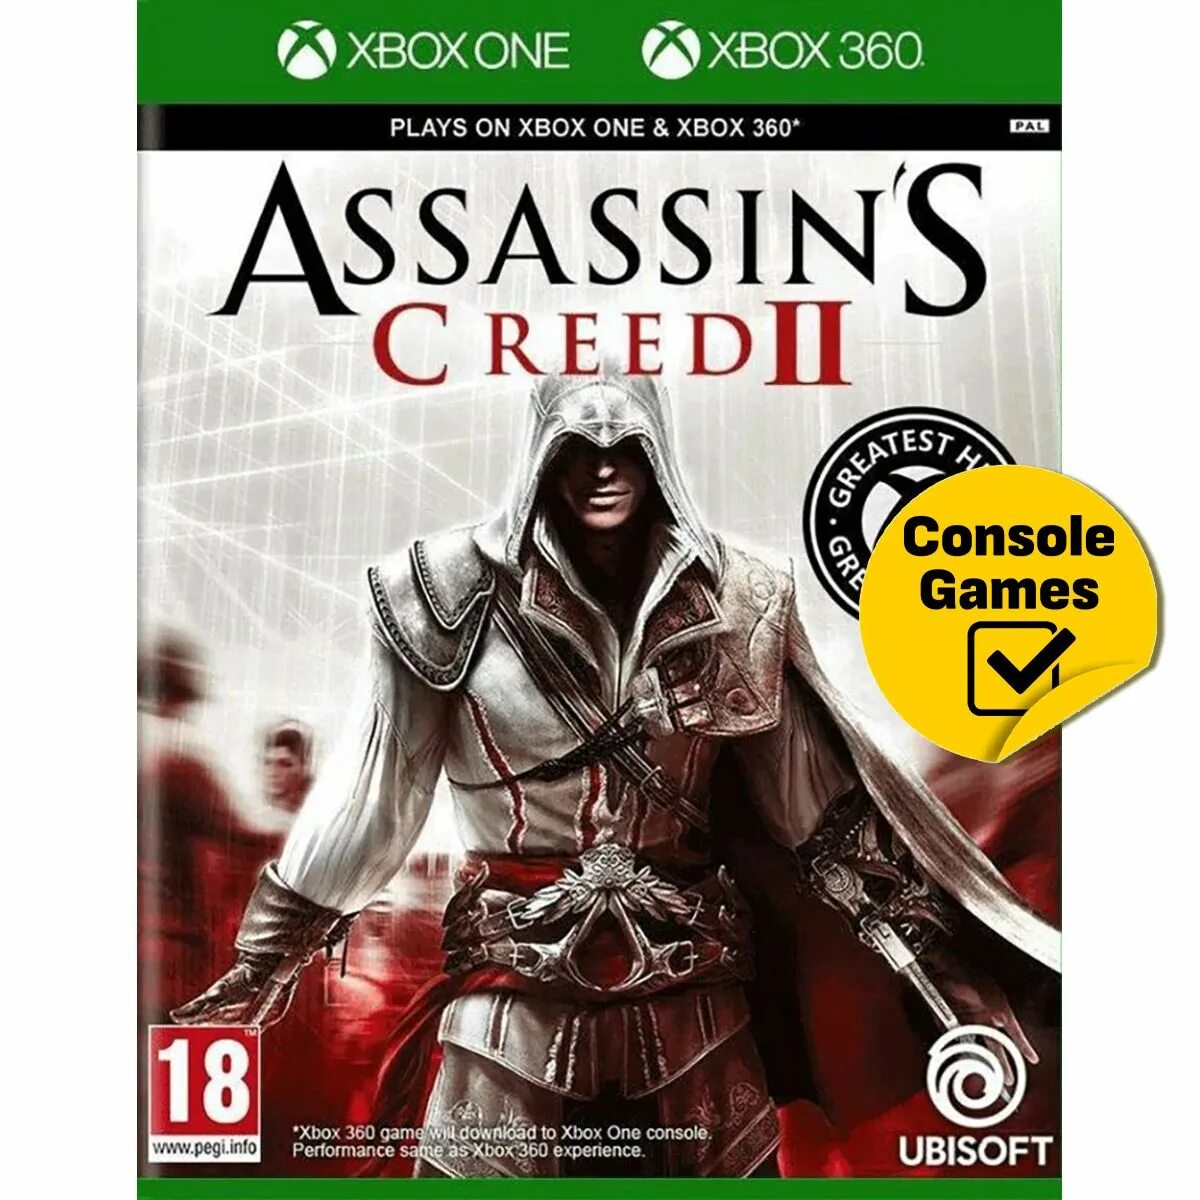 Assassin's Creed Xbox 360 диск. Ассасин Крид 2 на Xbox 360 диск. Ассасин Крид на Xbox 360. Assassins Creed 2 Xbox 360 обложка. Assassin s xbox 360